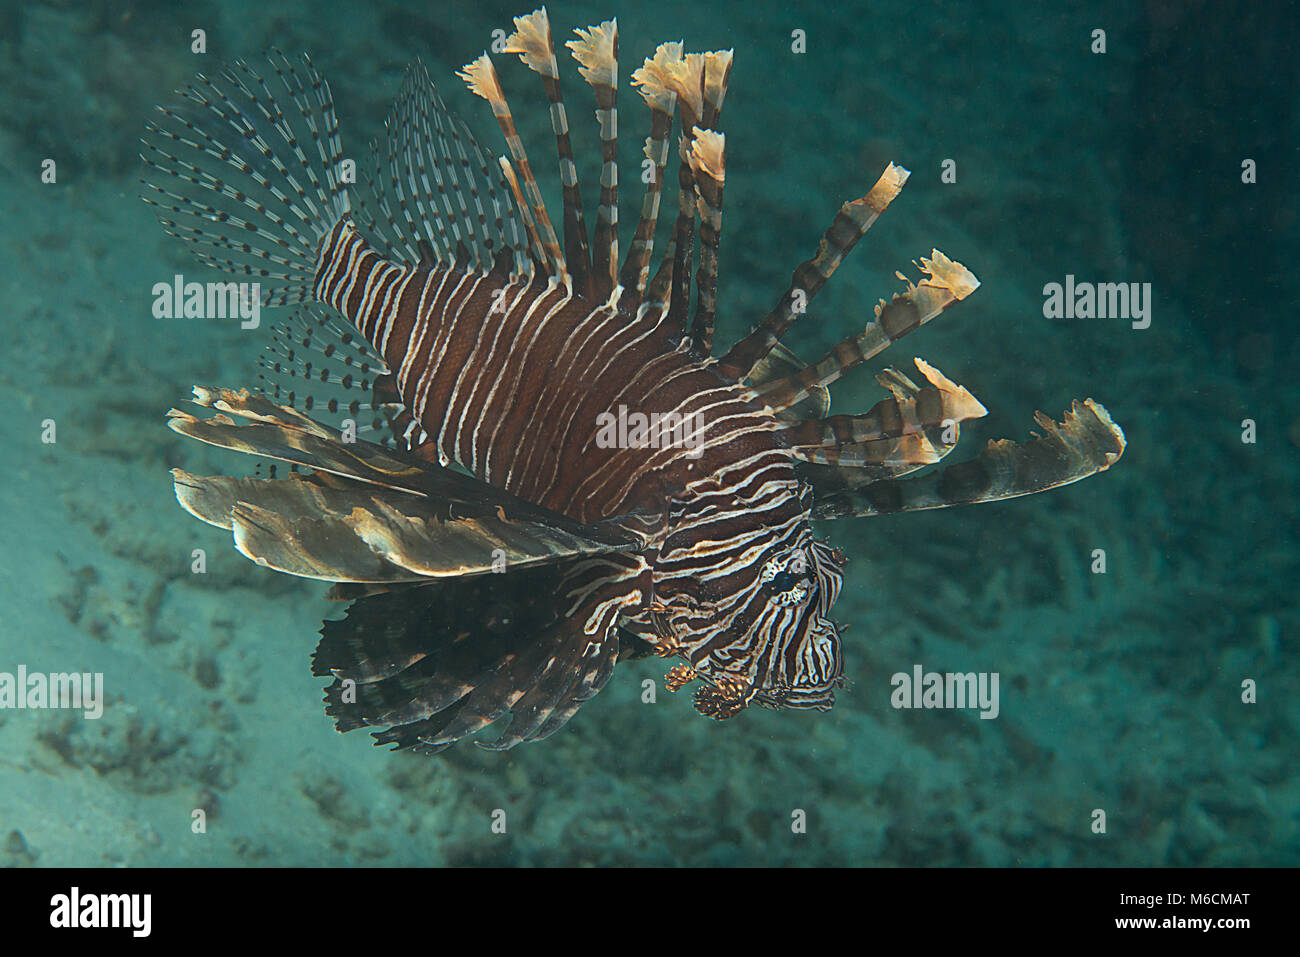 Indo-Pacific Lionfish (Pterois volitans) swimming  over corals of Bali Stock Photo